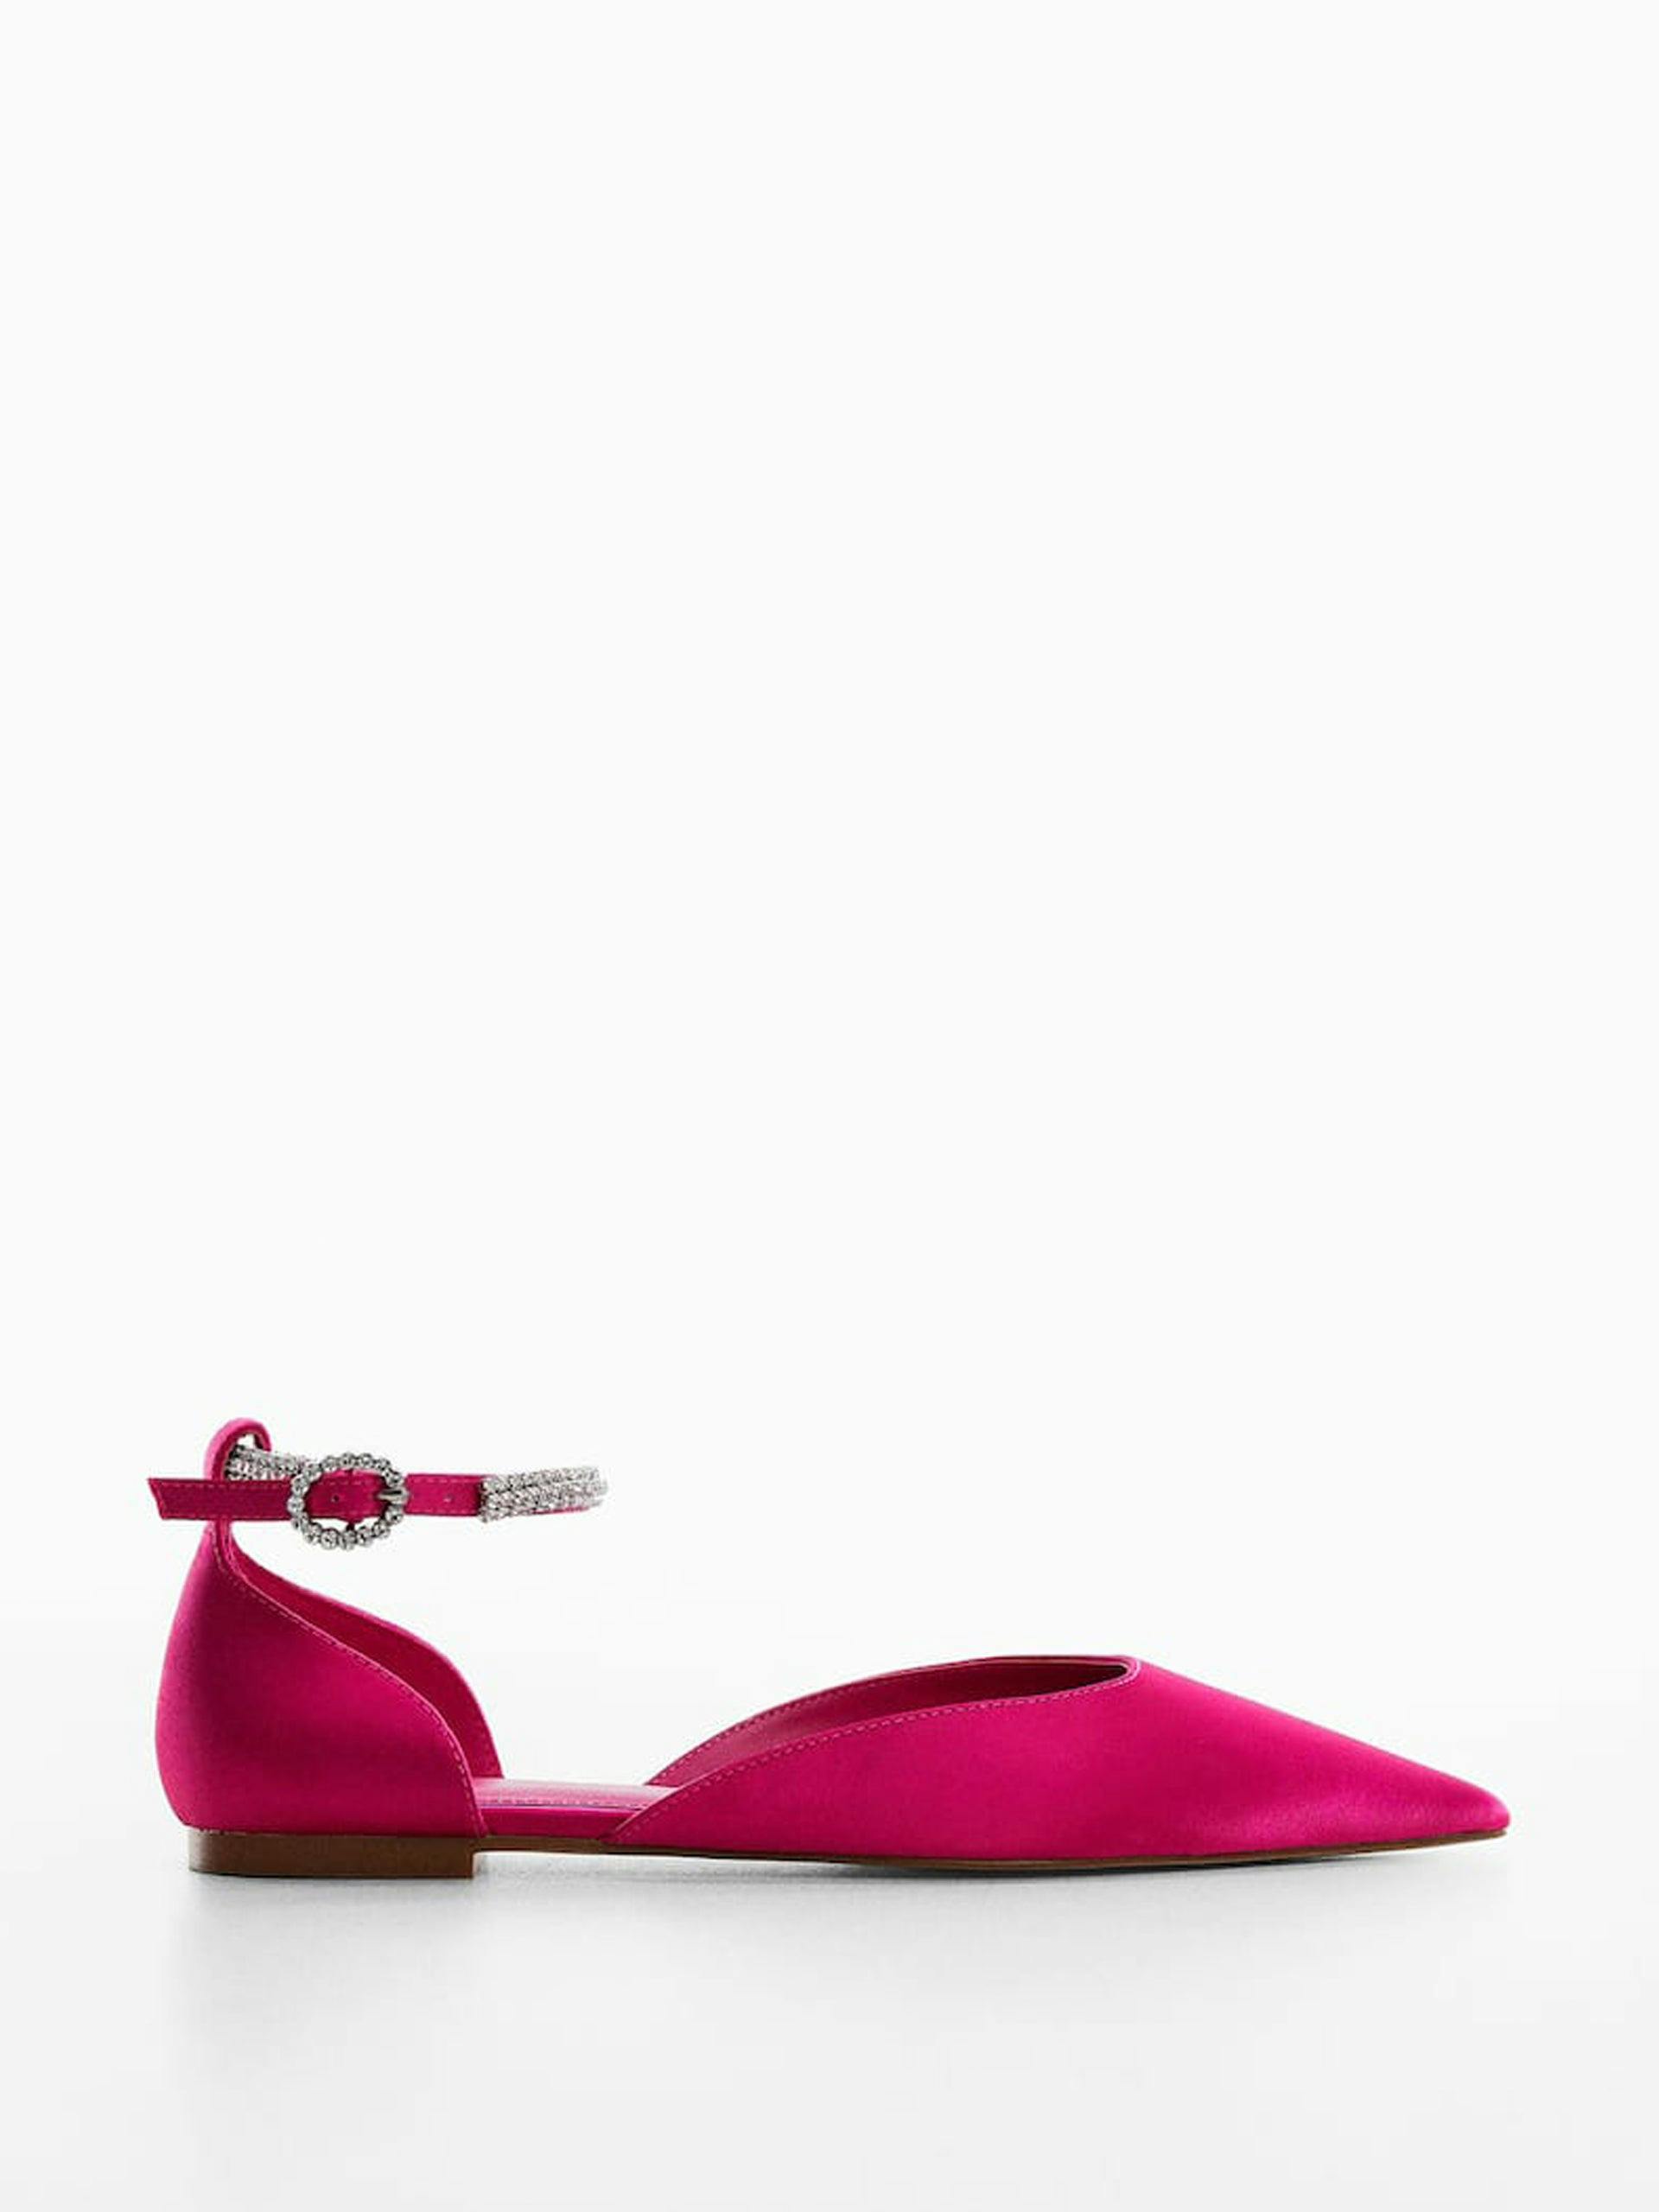 Bright pink pointed-toe pumps